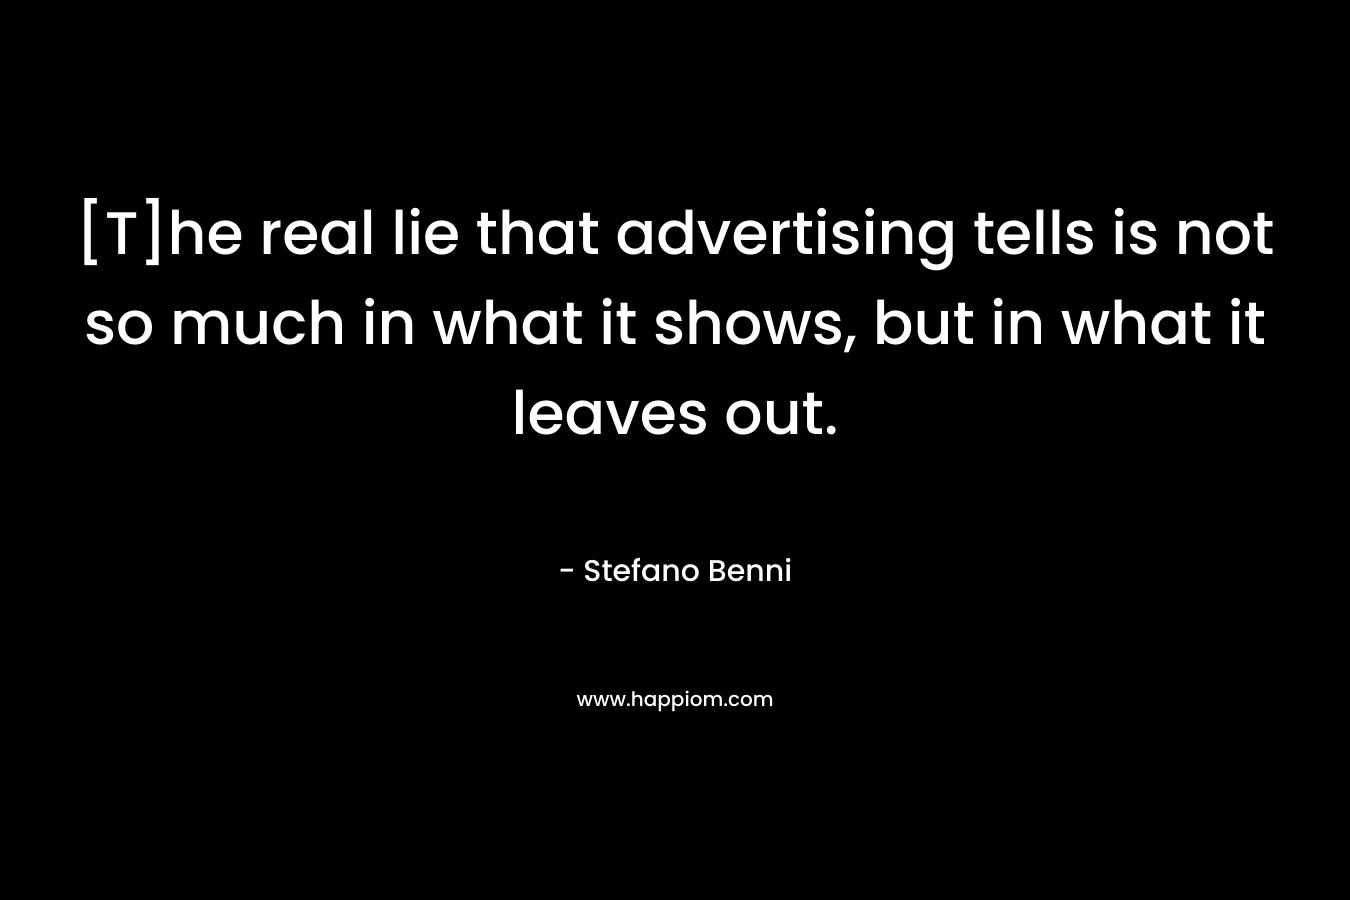 [T]he real lie that advertising tells is not so much in what it shows, but in what it leaves out. – Stefano Benni